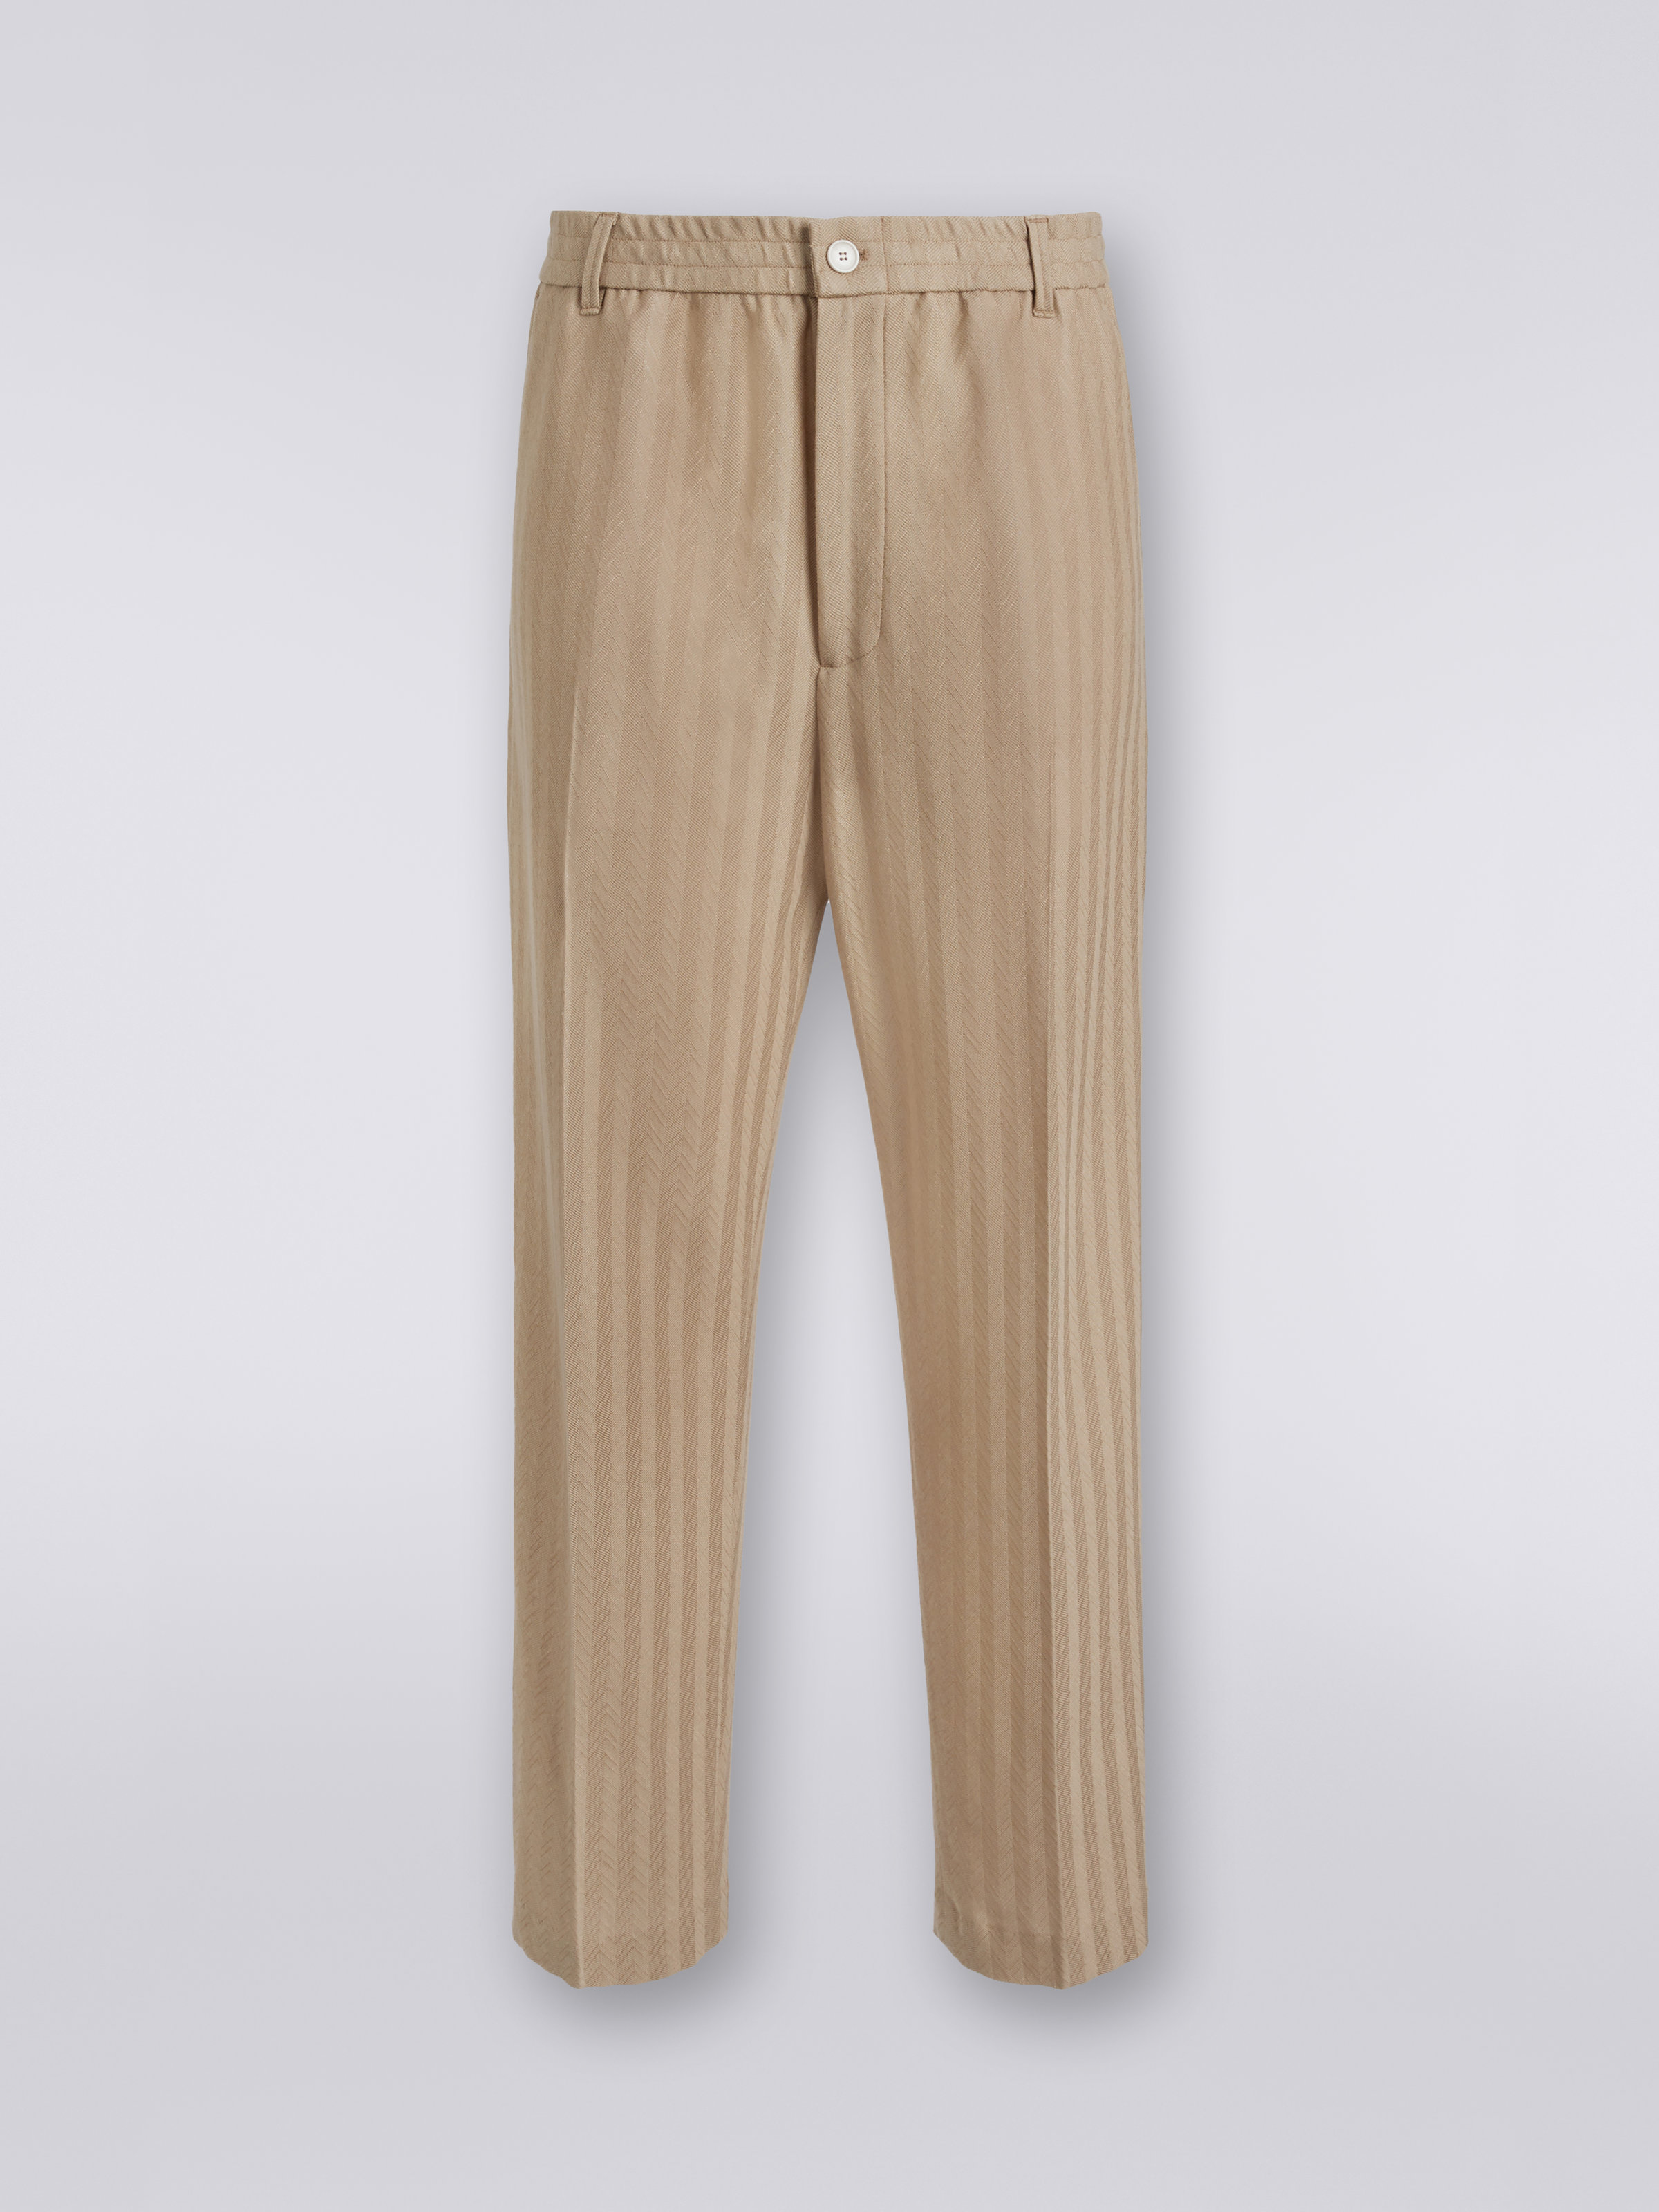 Viscose and cotton chevron trousers with ironed crease, White  - 0